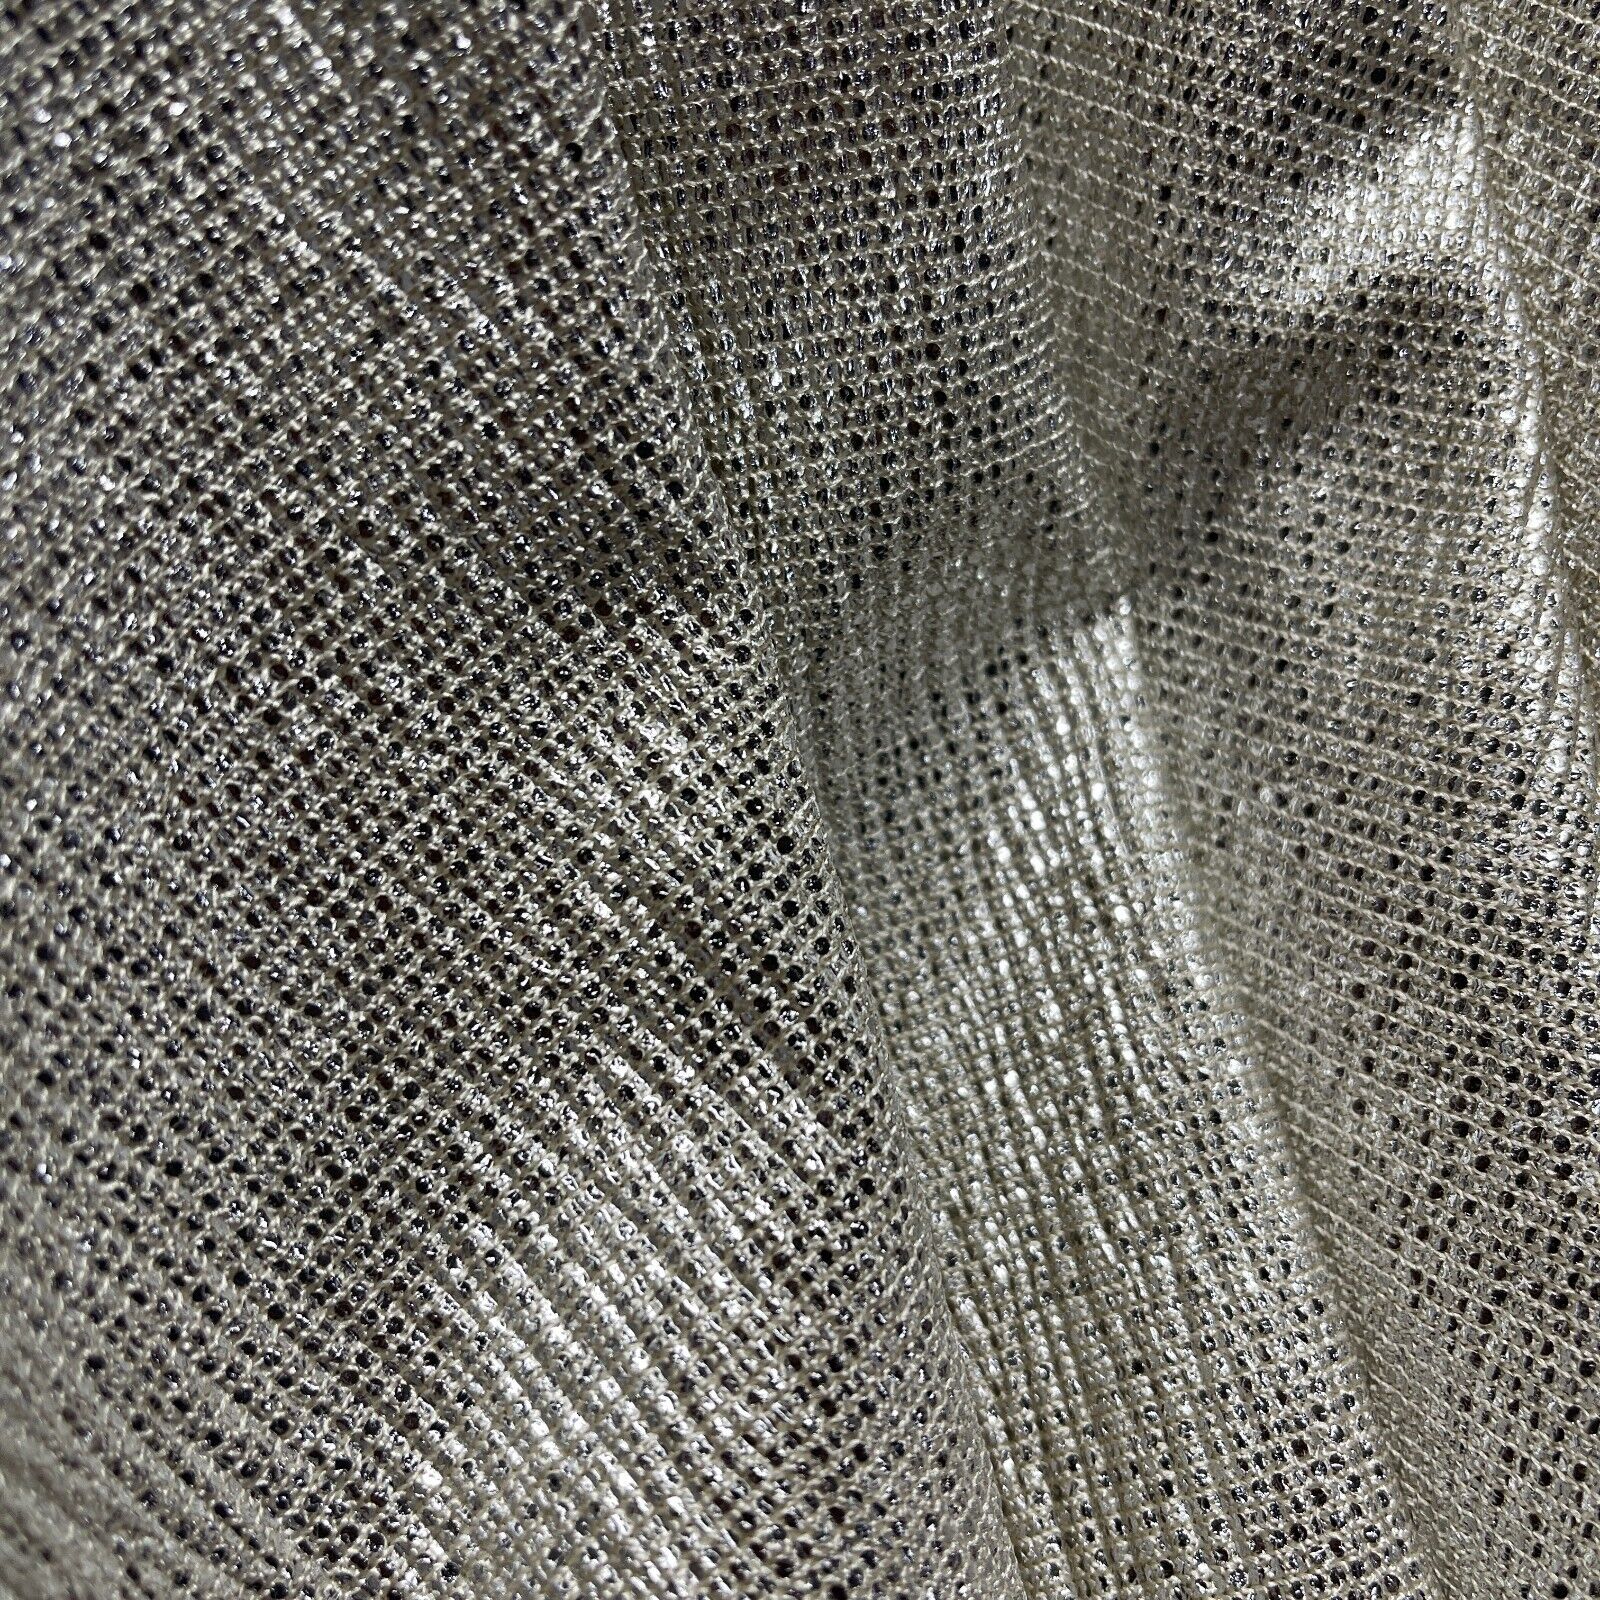 Jersey Foil Silver On Cream One way stretch Hologram Textured dress fabric M1740